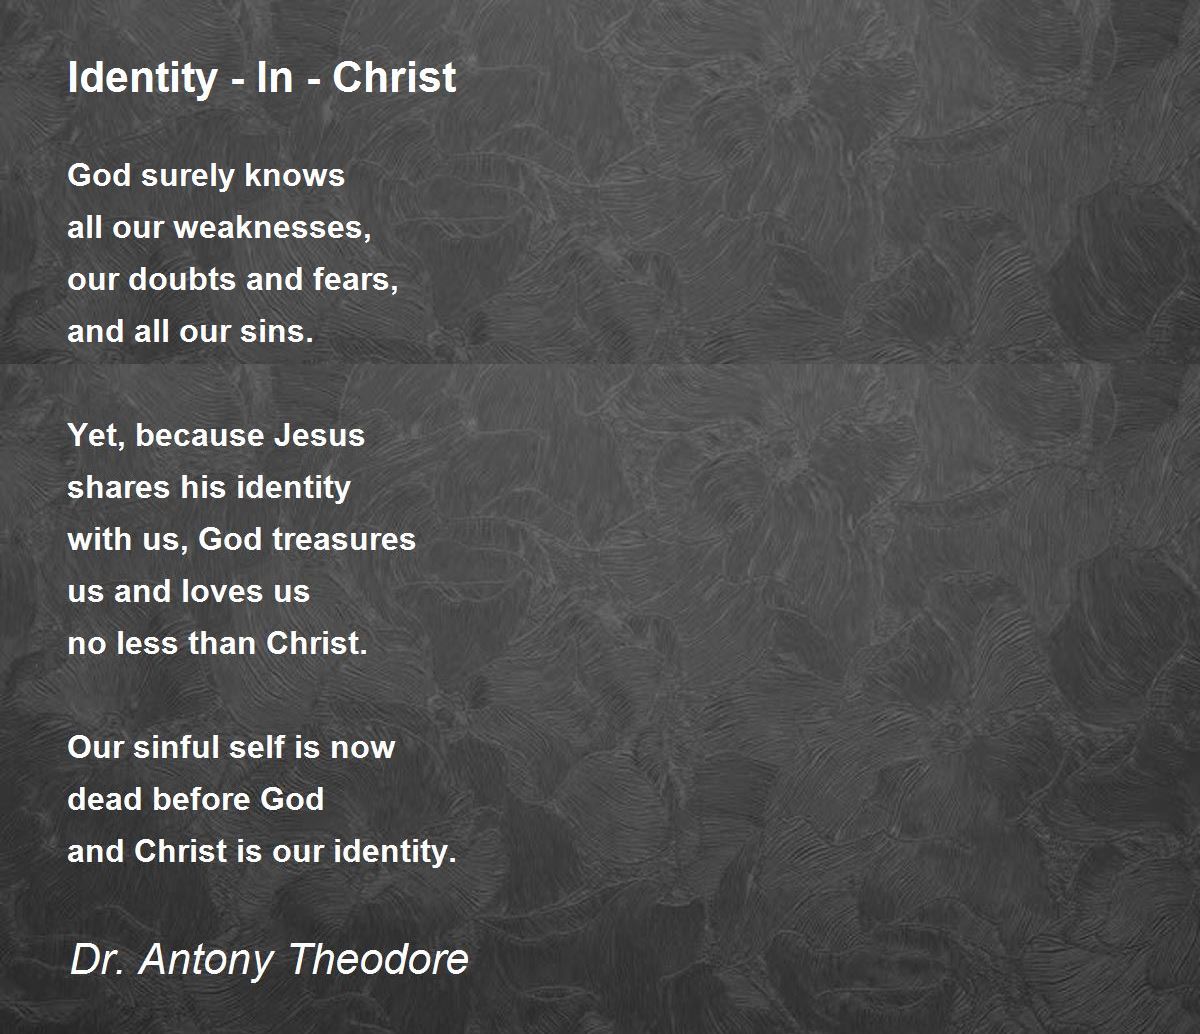 your identity in christ